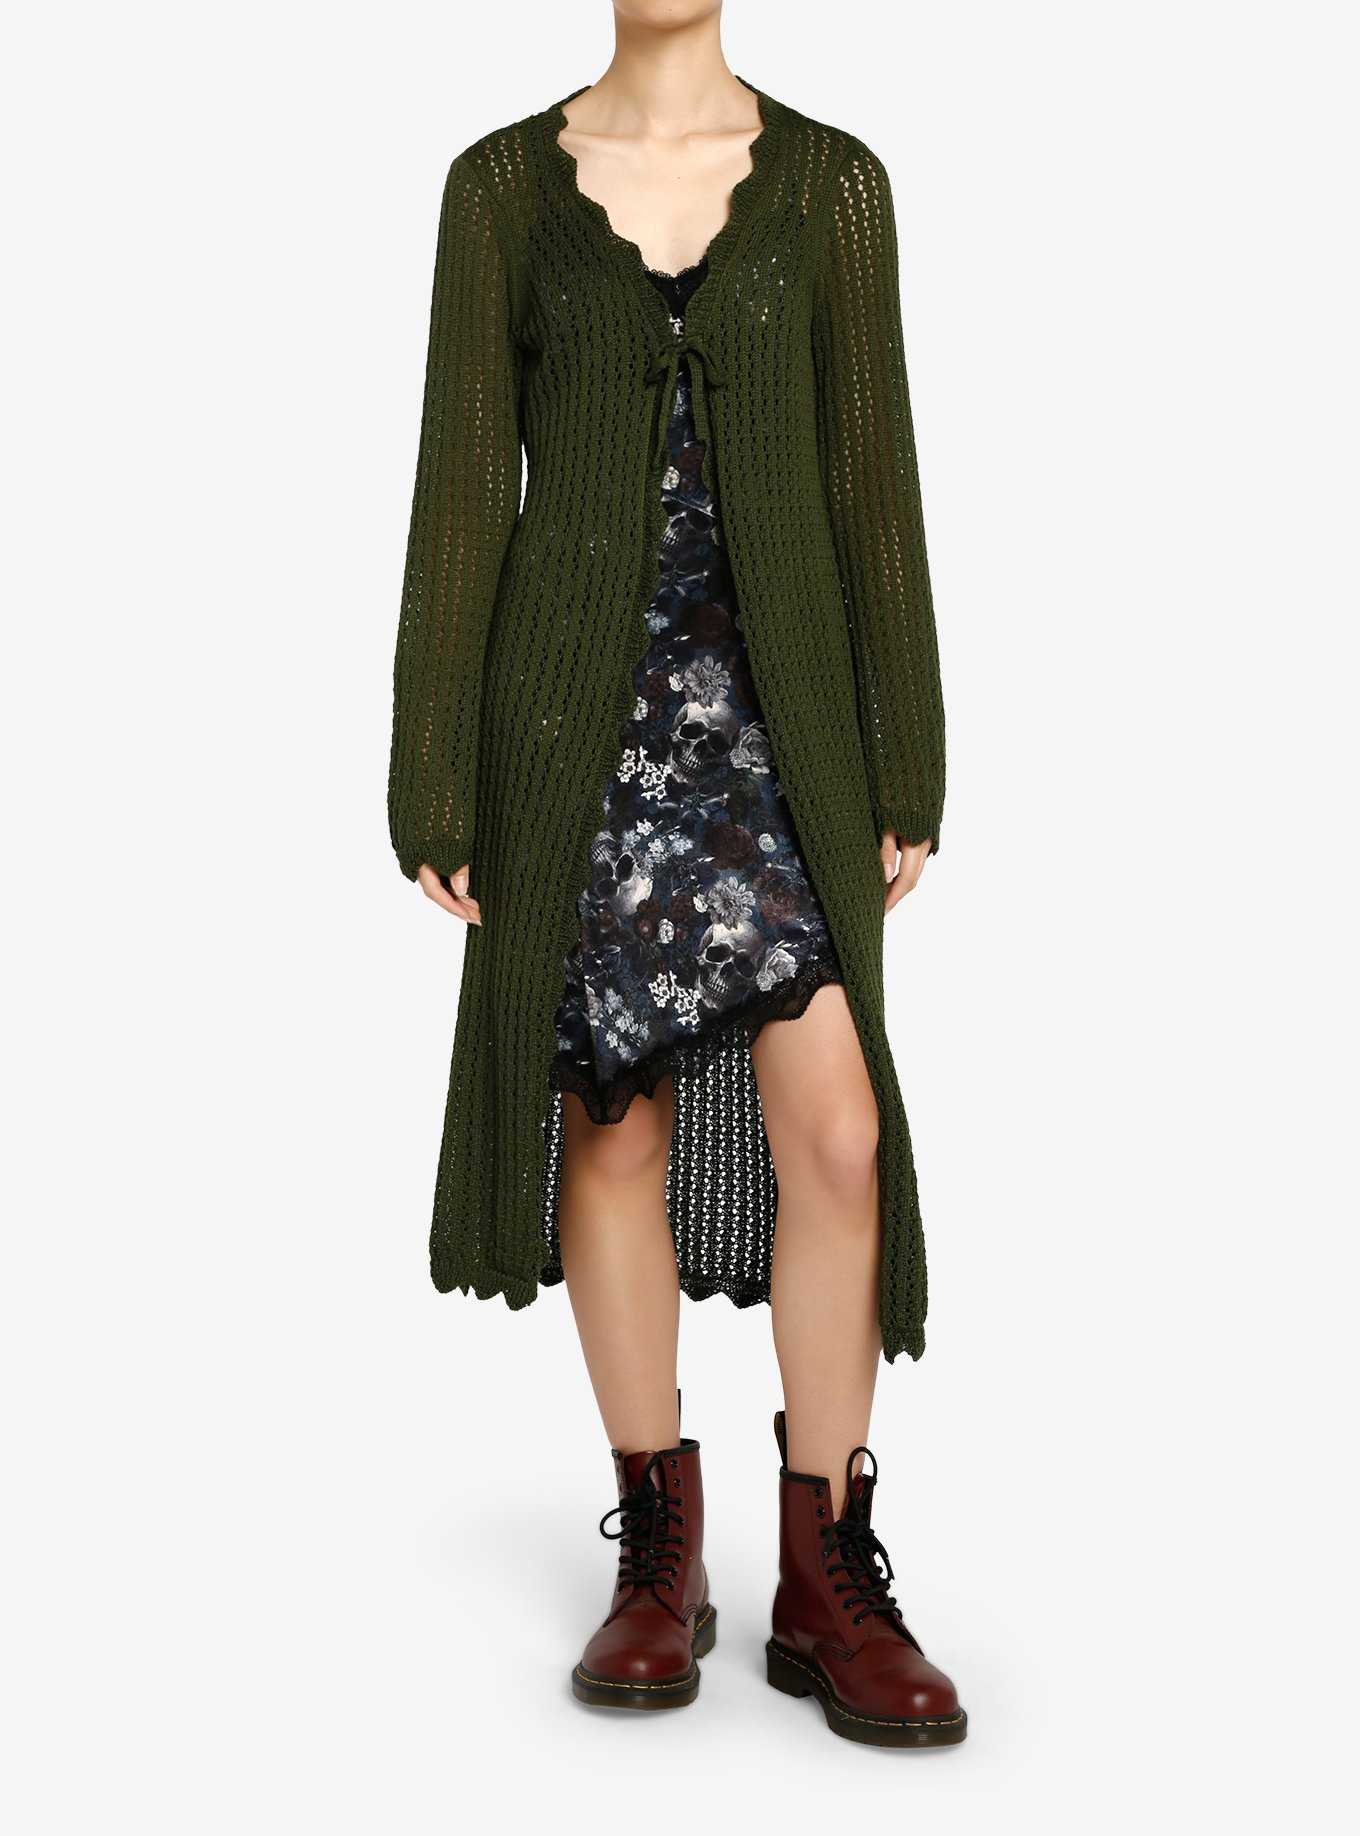 Thorn & Fable Green Tie-Front Girls Midi Knit Cardigan, , hi-res